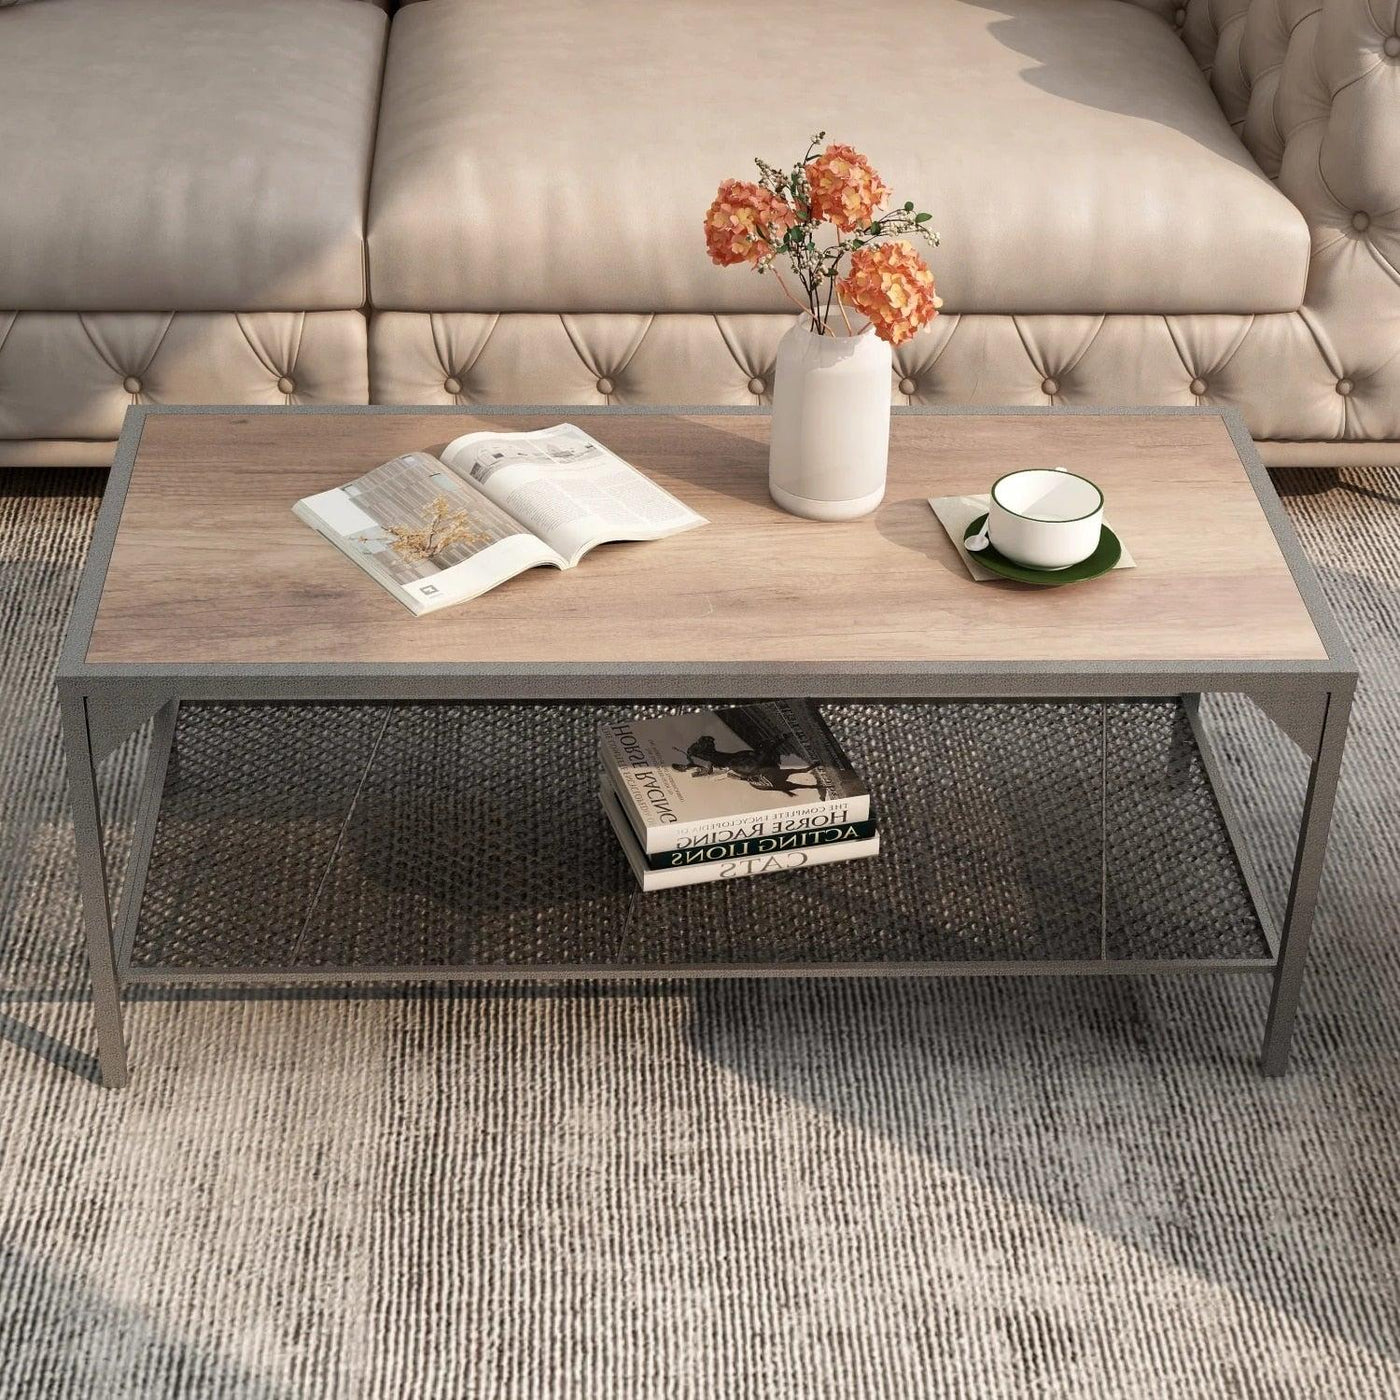 Cuboid Coffee Table Water-Proof Scratch-Resistant W/3D Texture Metal Frame happypetssupply